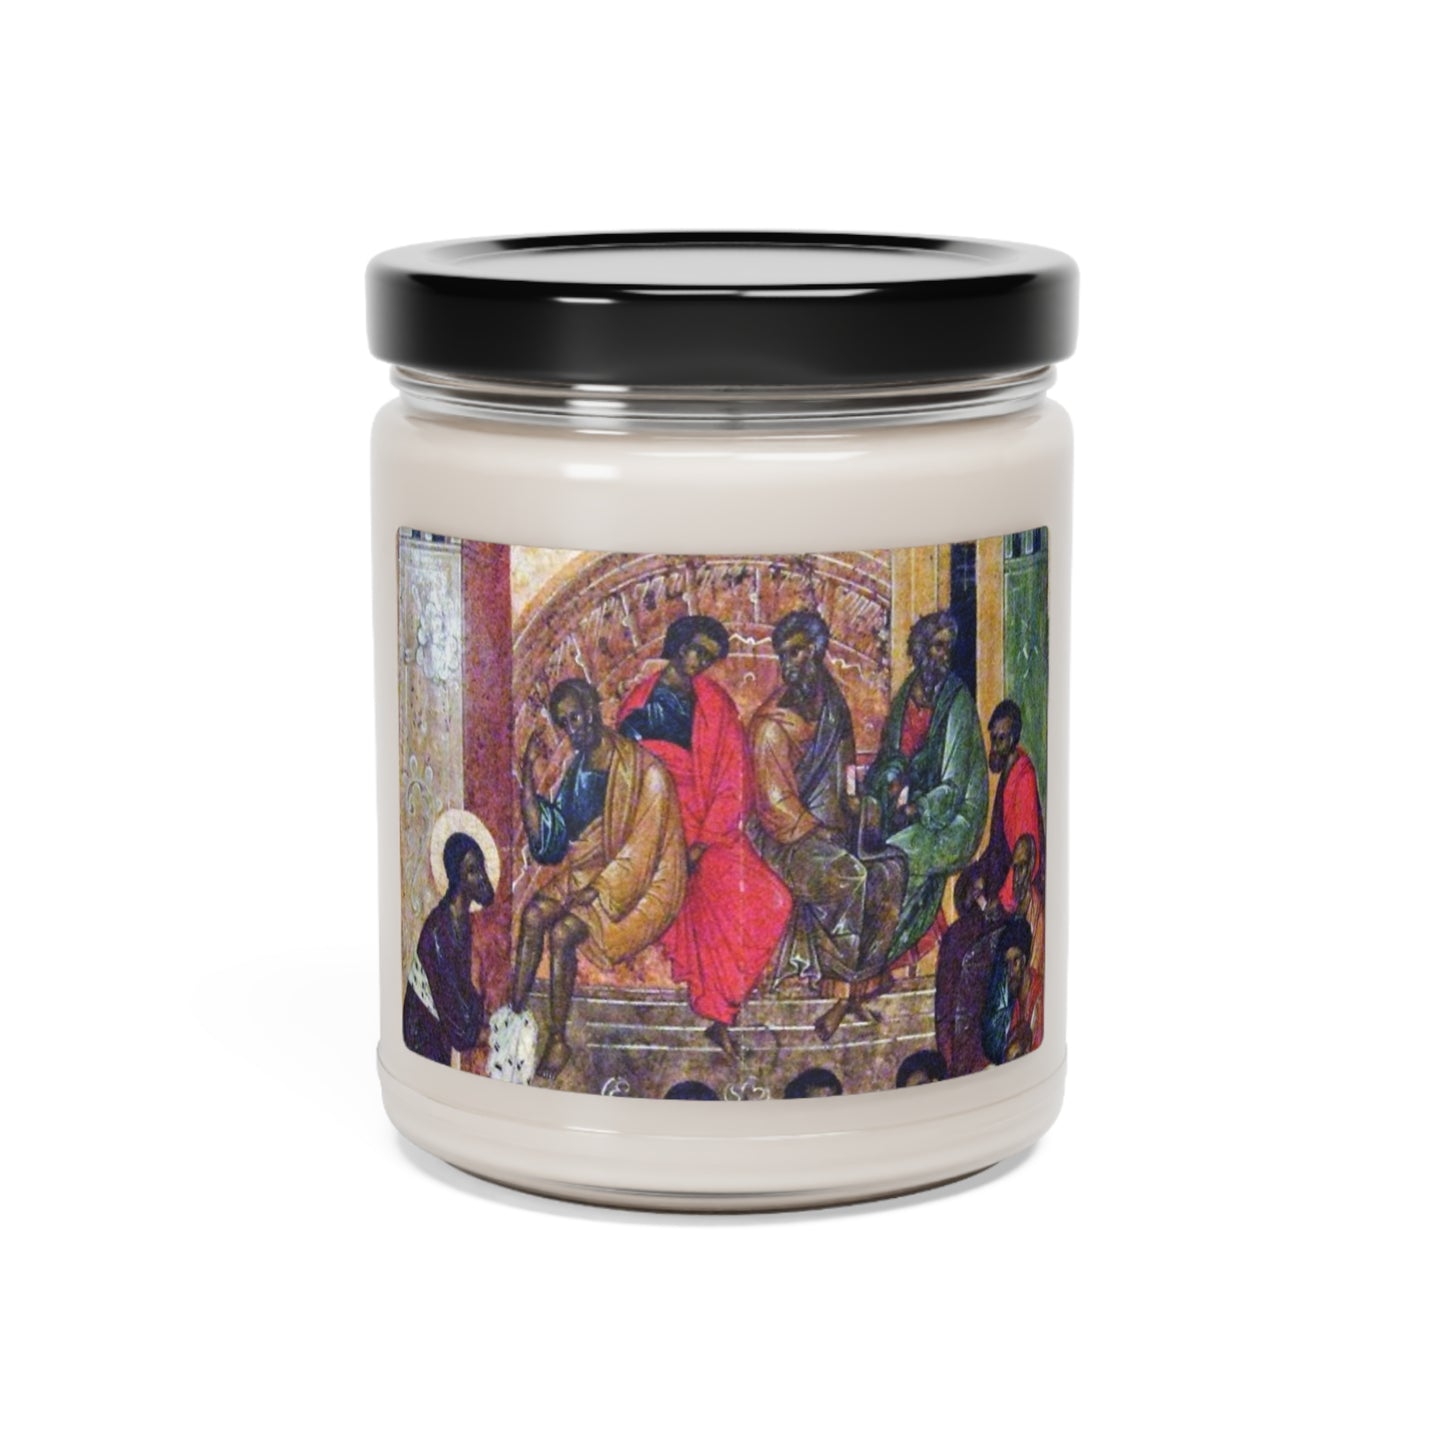 Jesus Washes Feet Of Disciples-Candle, 9oz